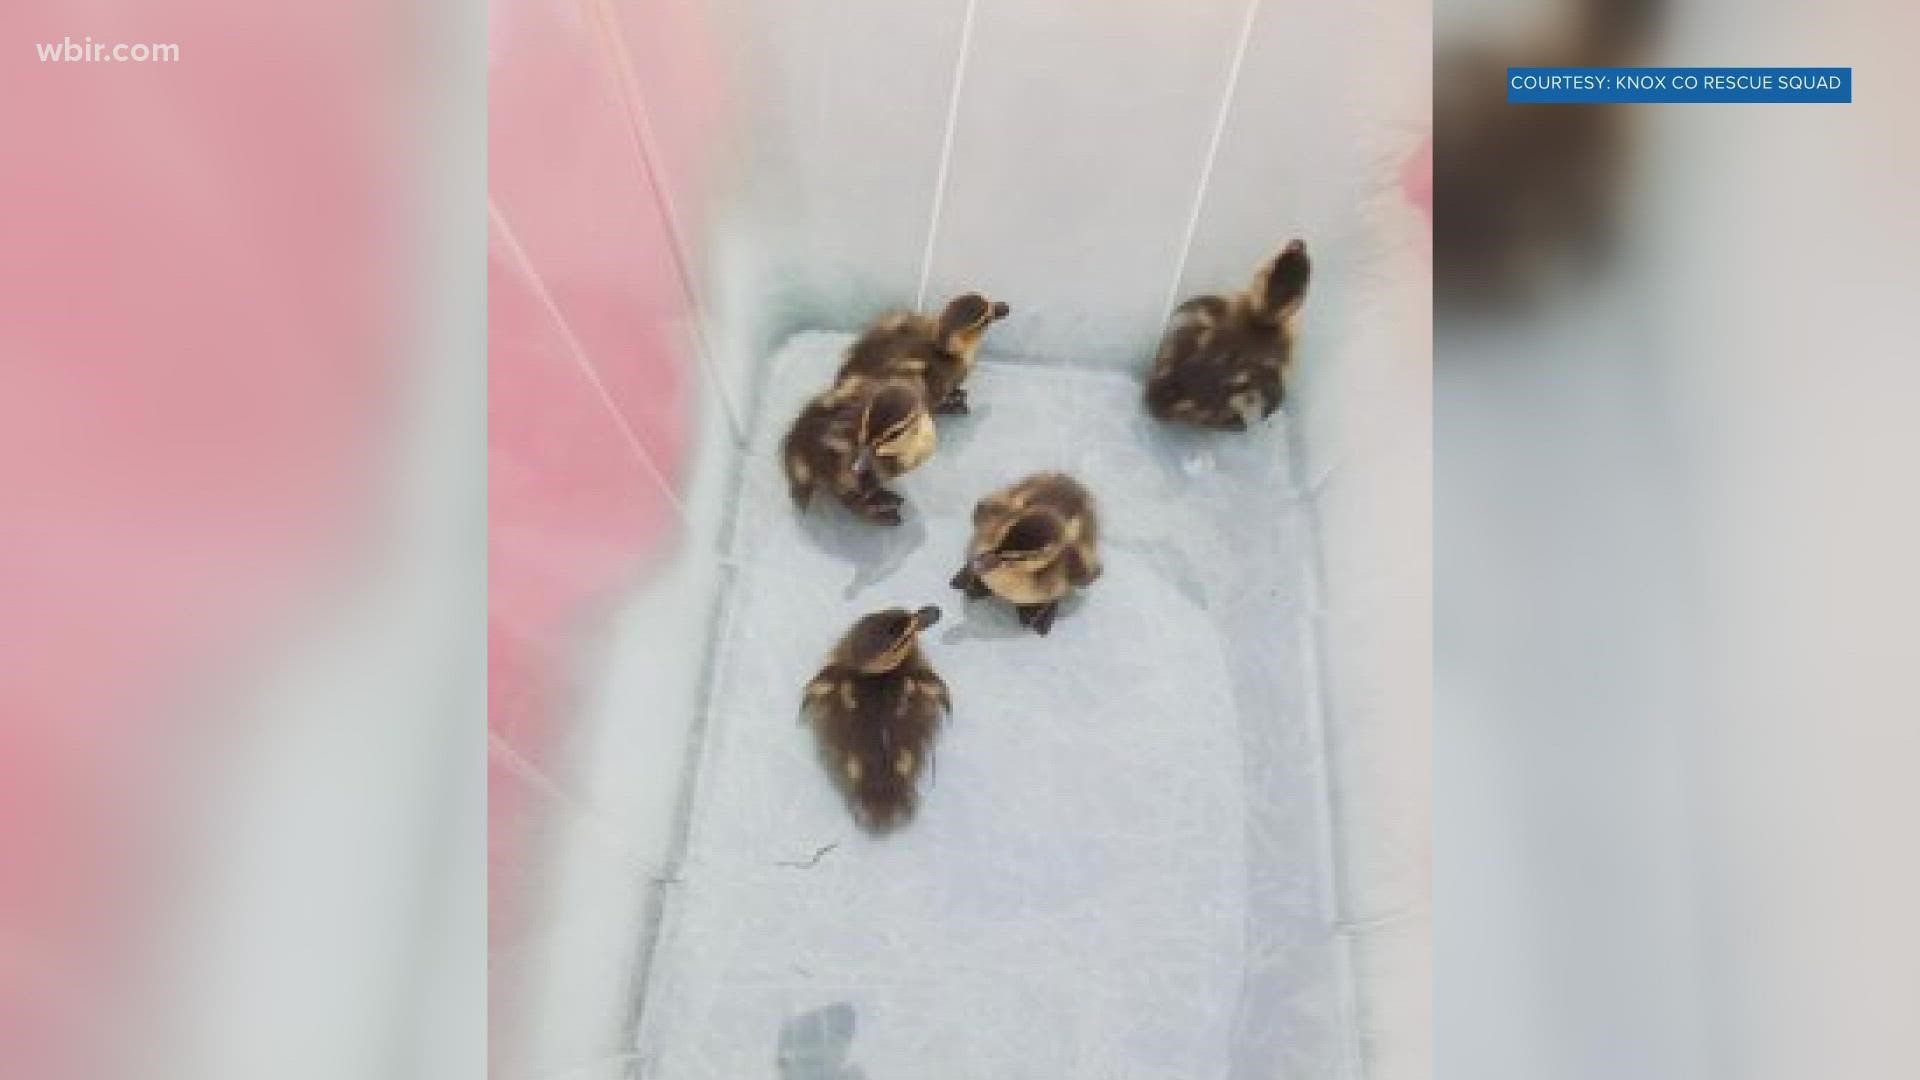 Officials said a passerby noticed a mother duck crying and calling down to the ducklings before they reached out to emergency crews.